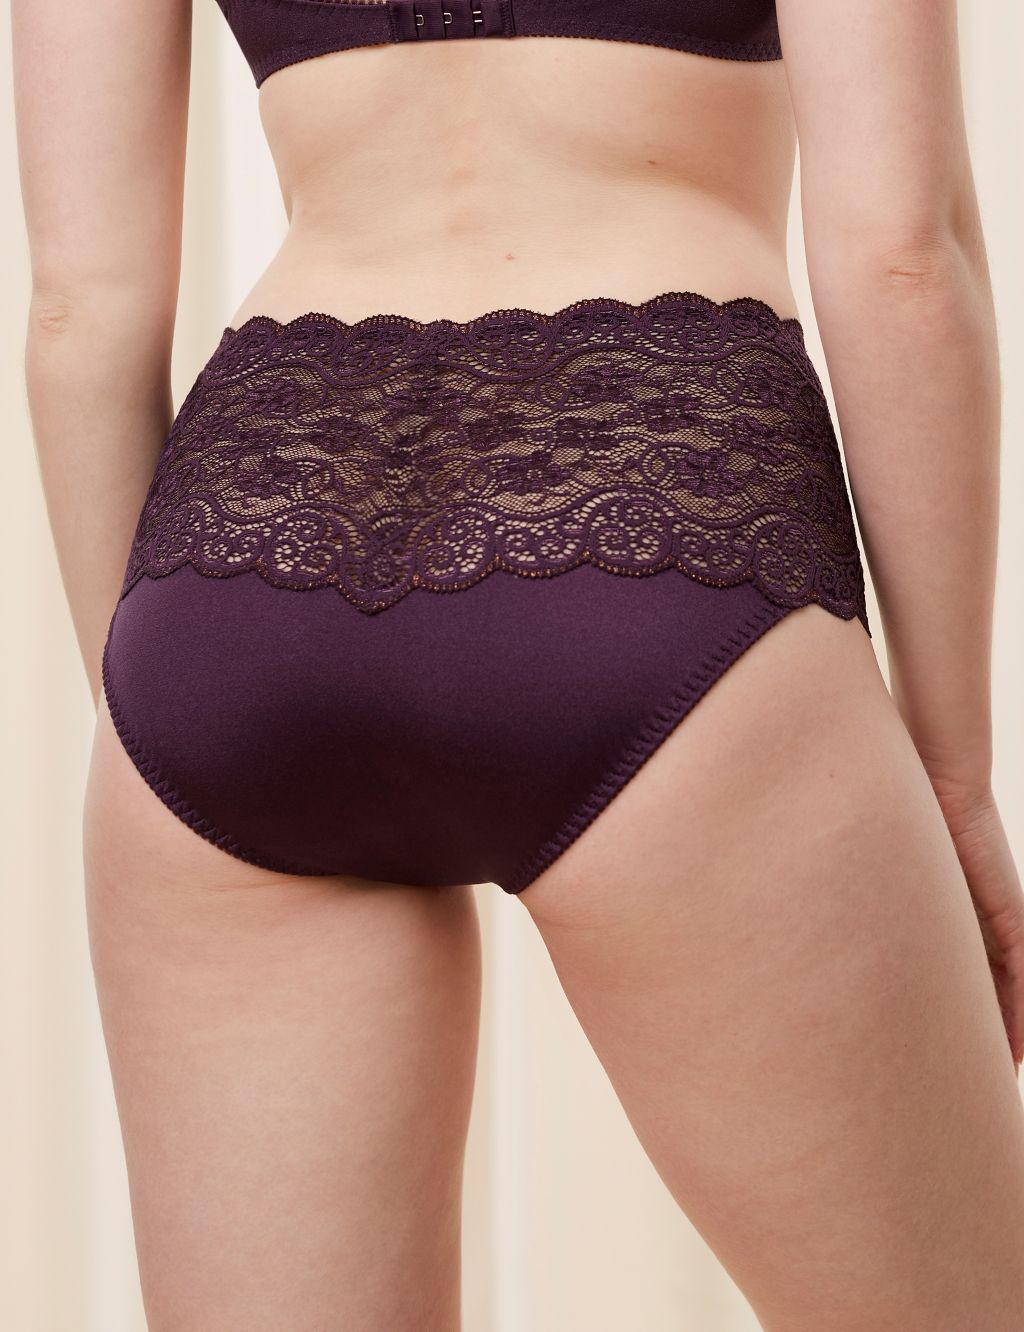 Amourette 300 All Over Lace Full Briefs image 2